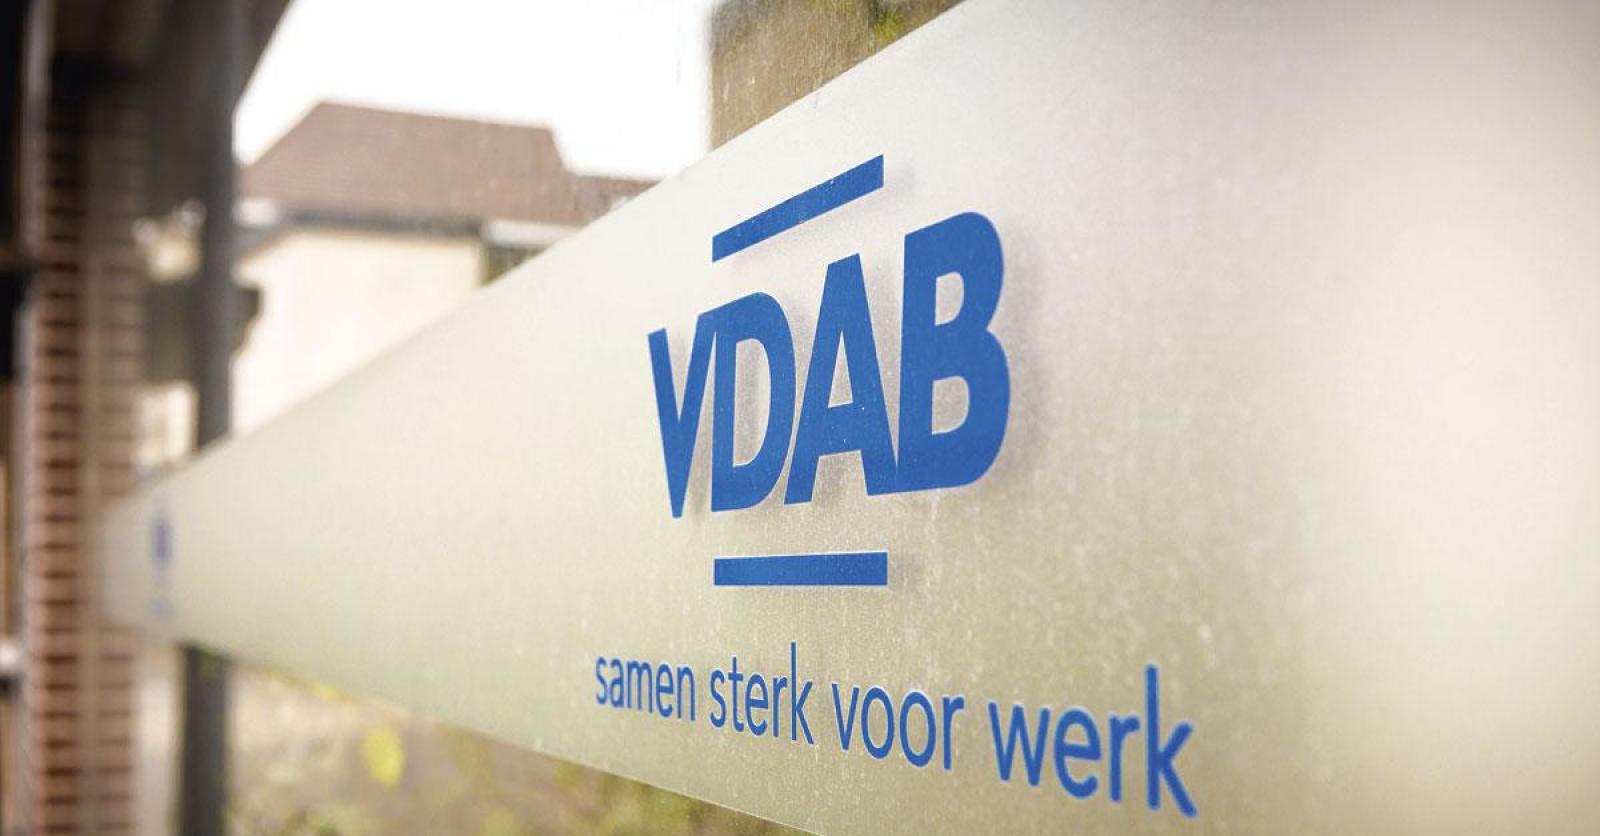 The union is urging the VDAB to provide better guidance for the long-term unemployed